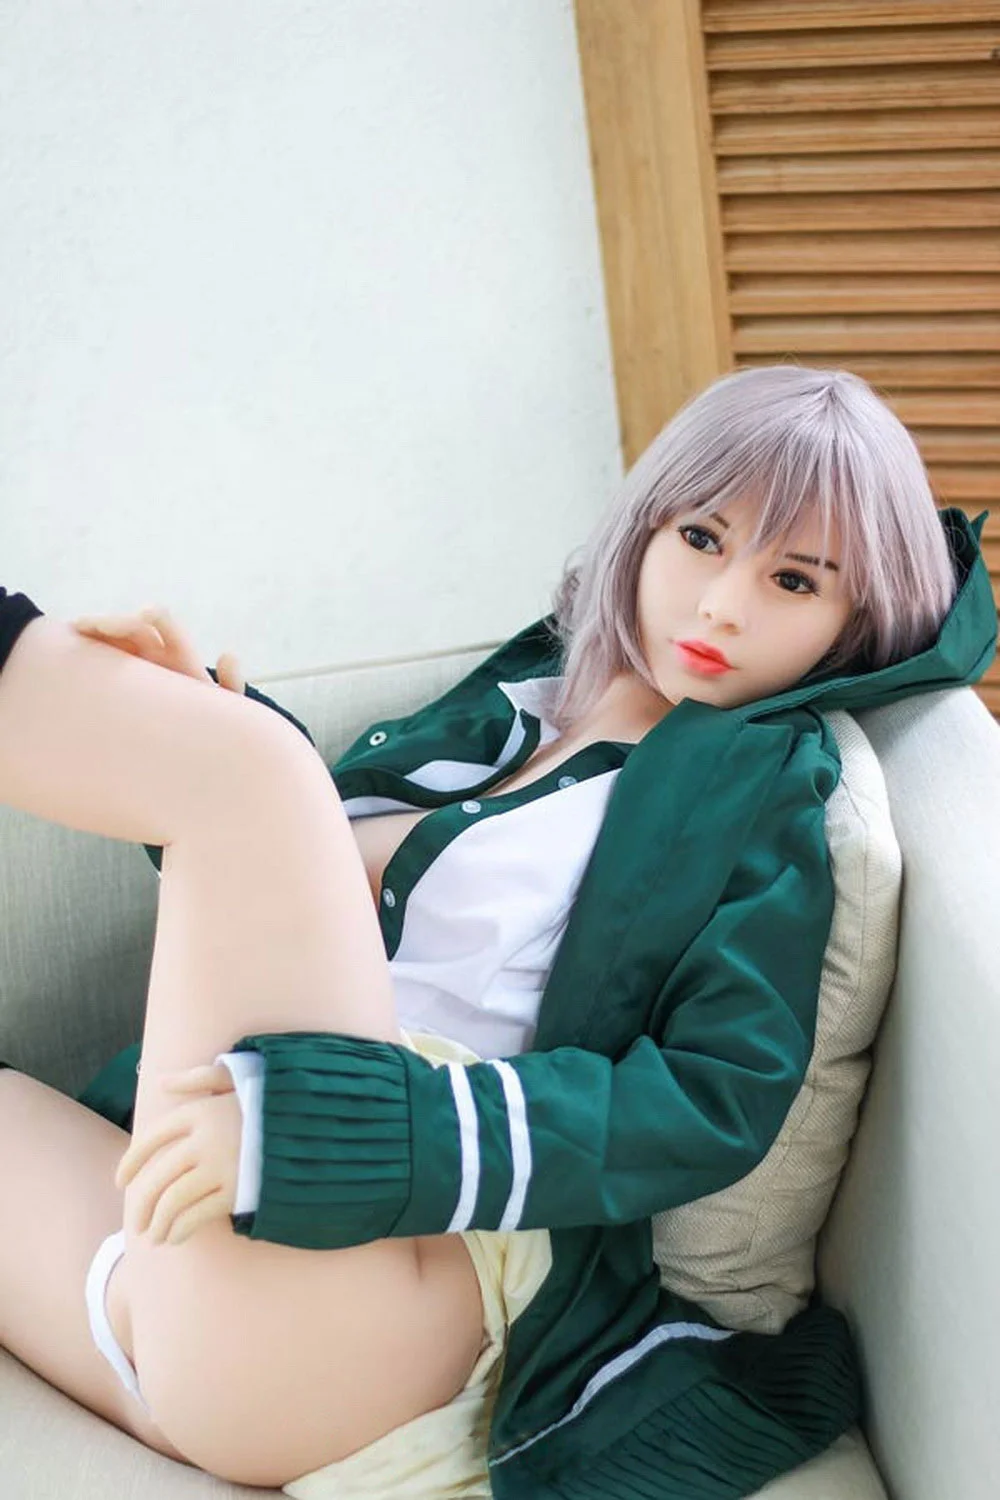 An anime sex doll with one leg raised and hands on it